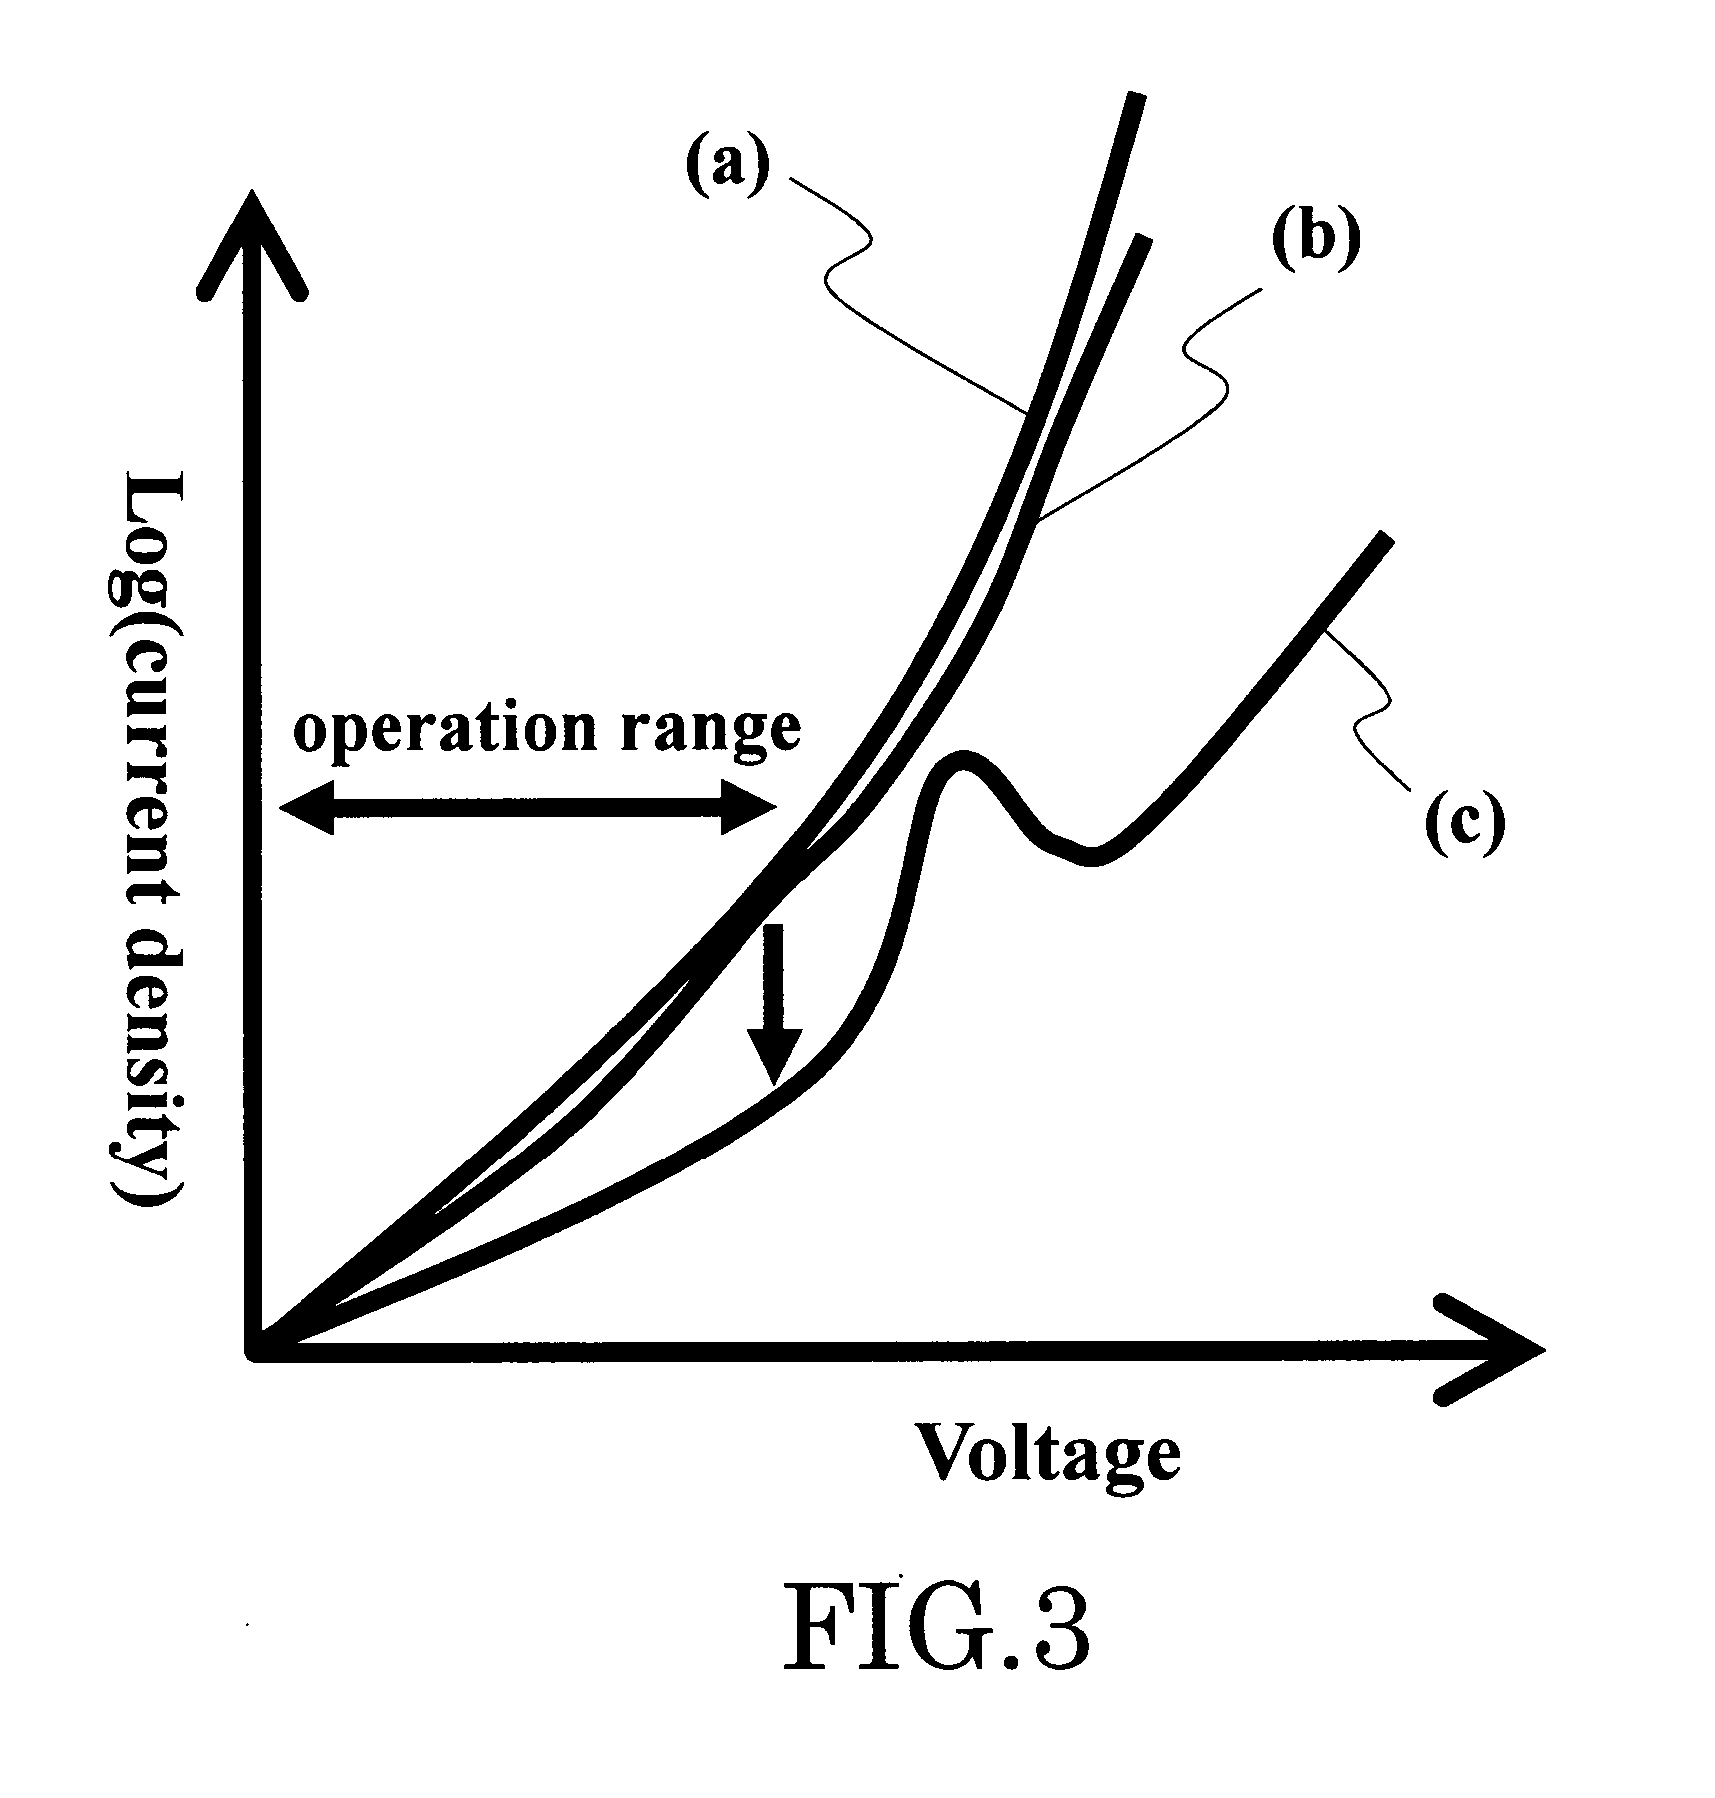 Insulating film and electronic device